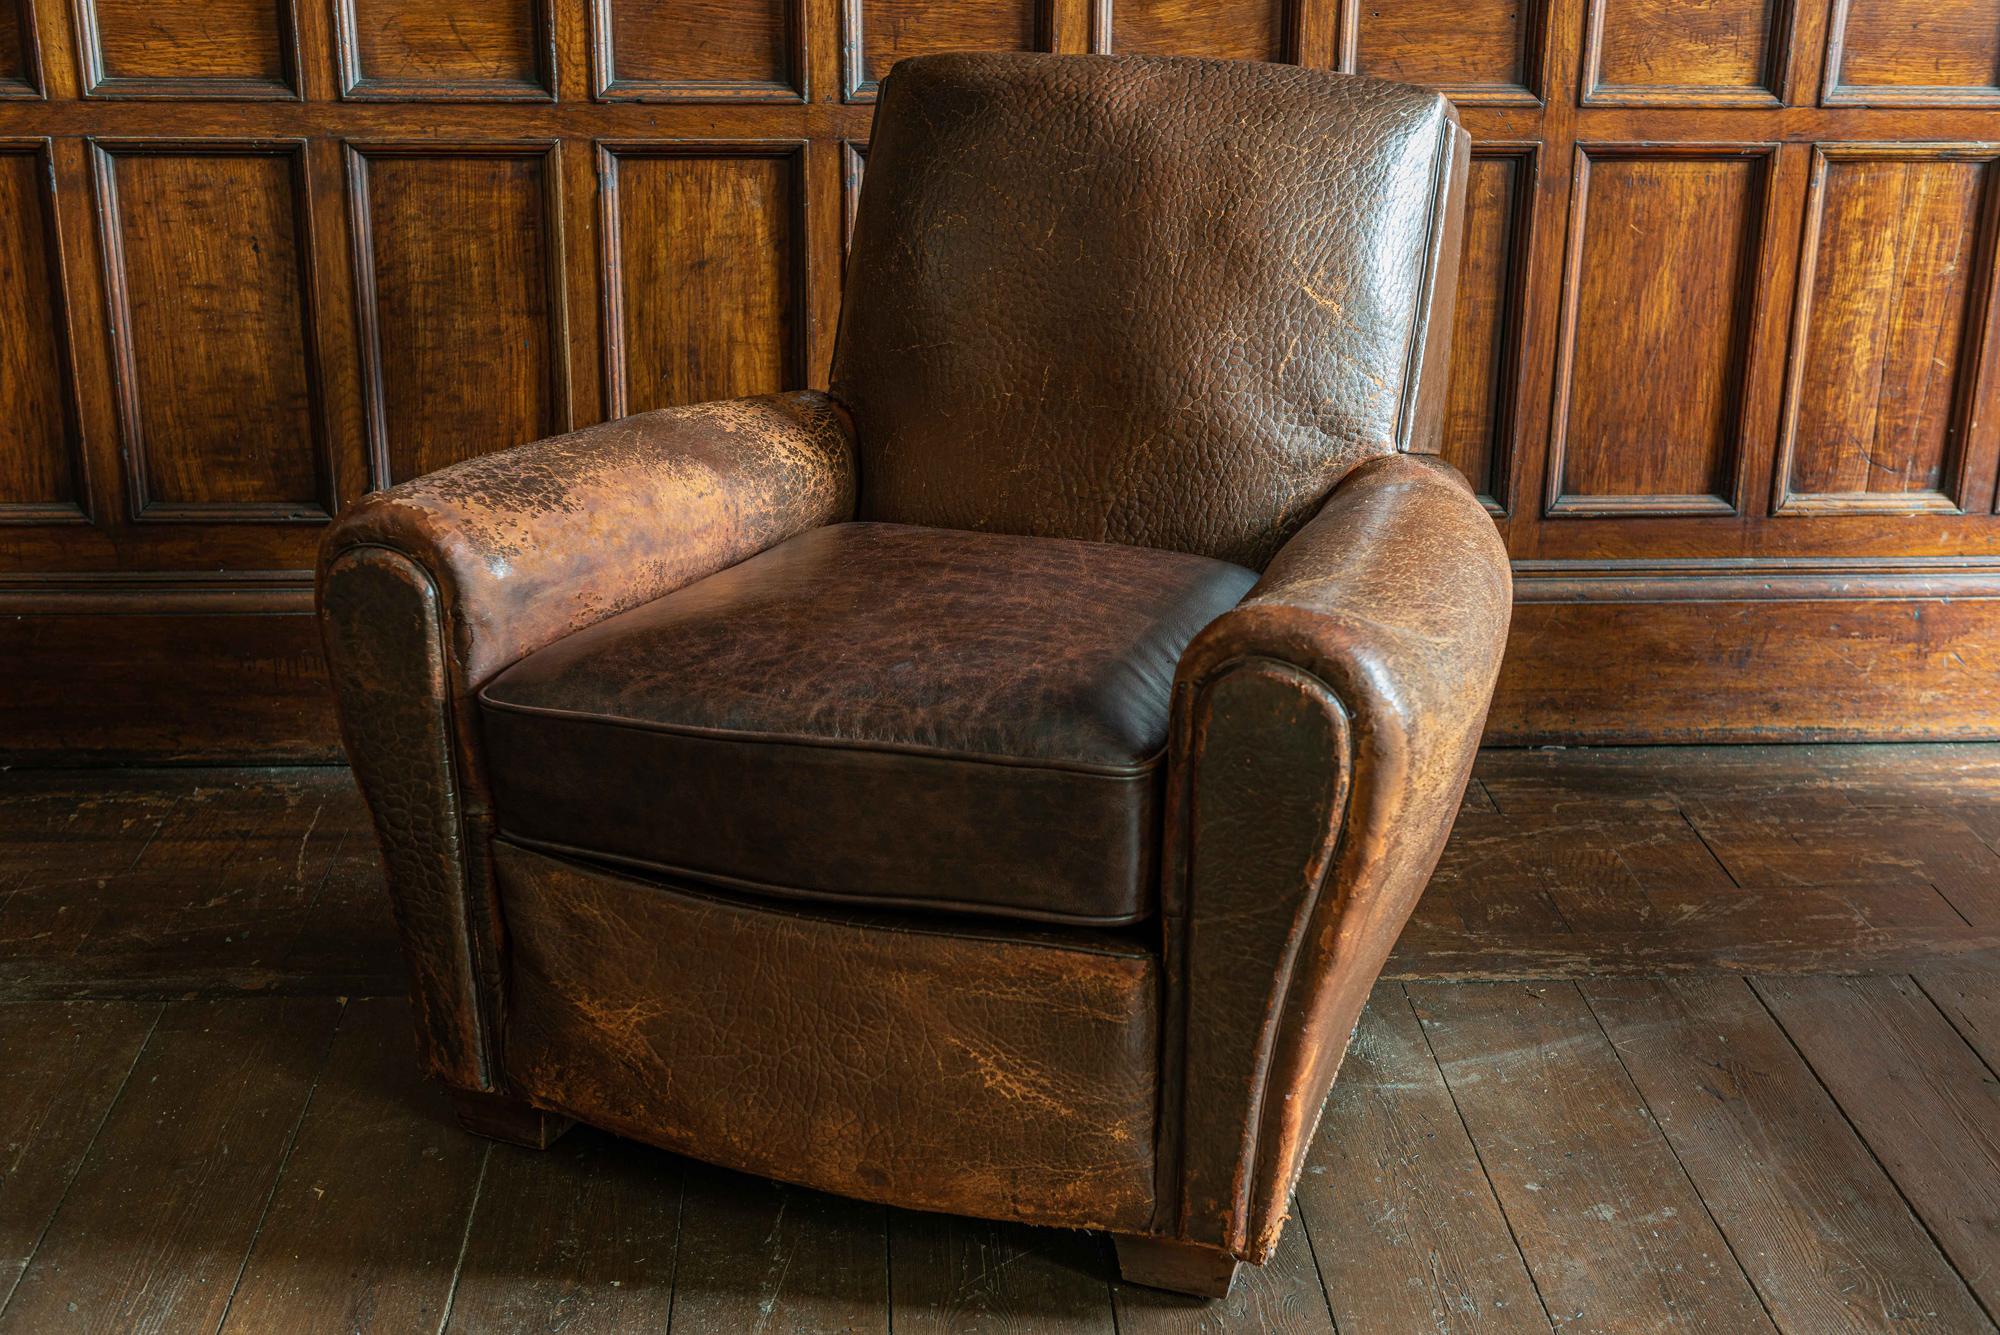 Pair of French cigar brown leather club chairs, circa 1940
Just the right amount of wear gives this pair an excellent colour. The leather is in good condition with the odd repair and light scratches here and there but very good for its age. Both